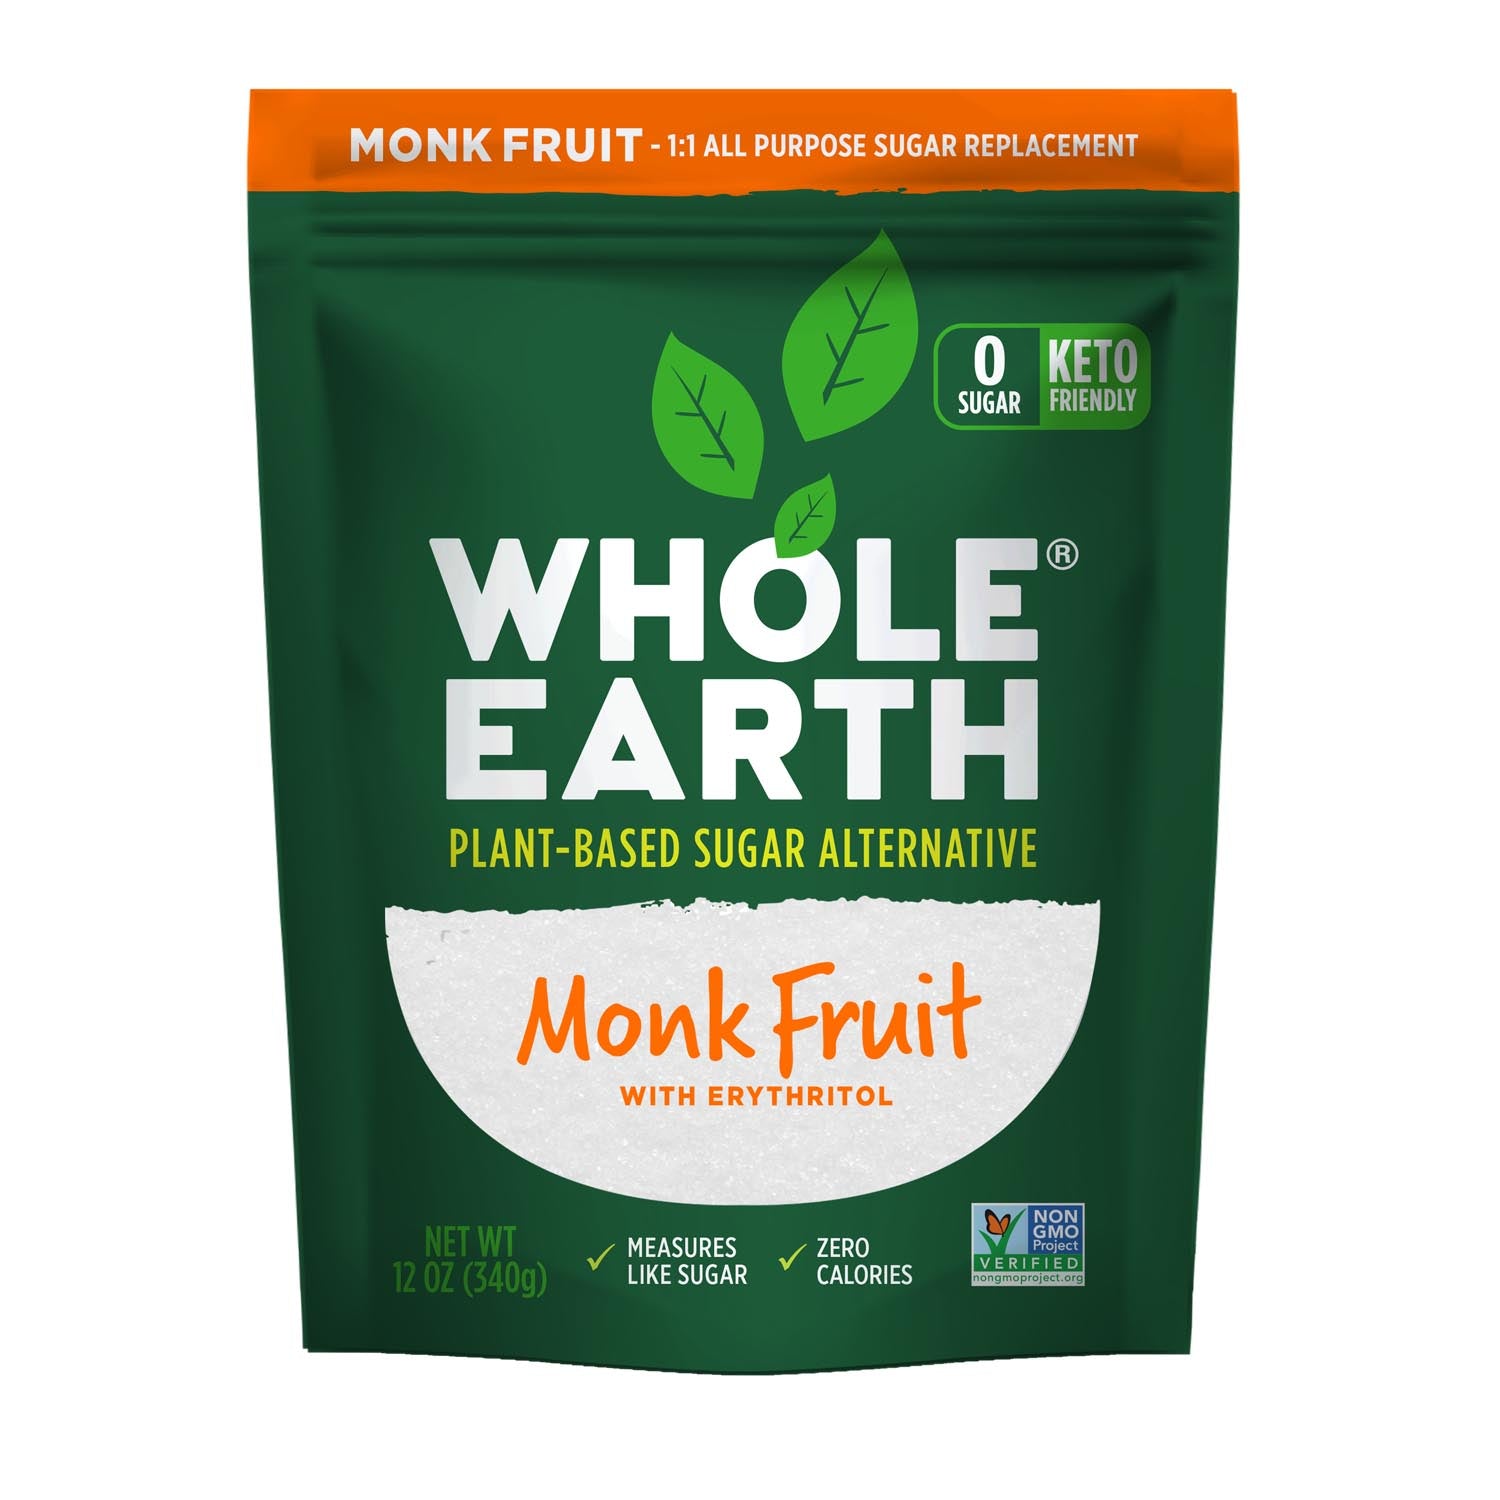 Whole Earth® Monk Fruit with Erythritol - 6/12oz Bag